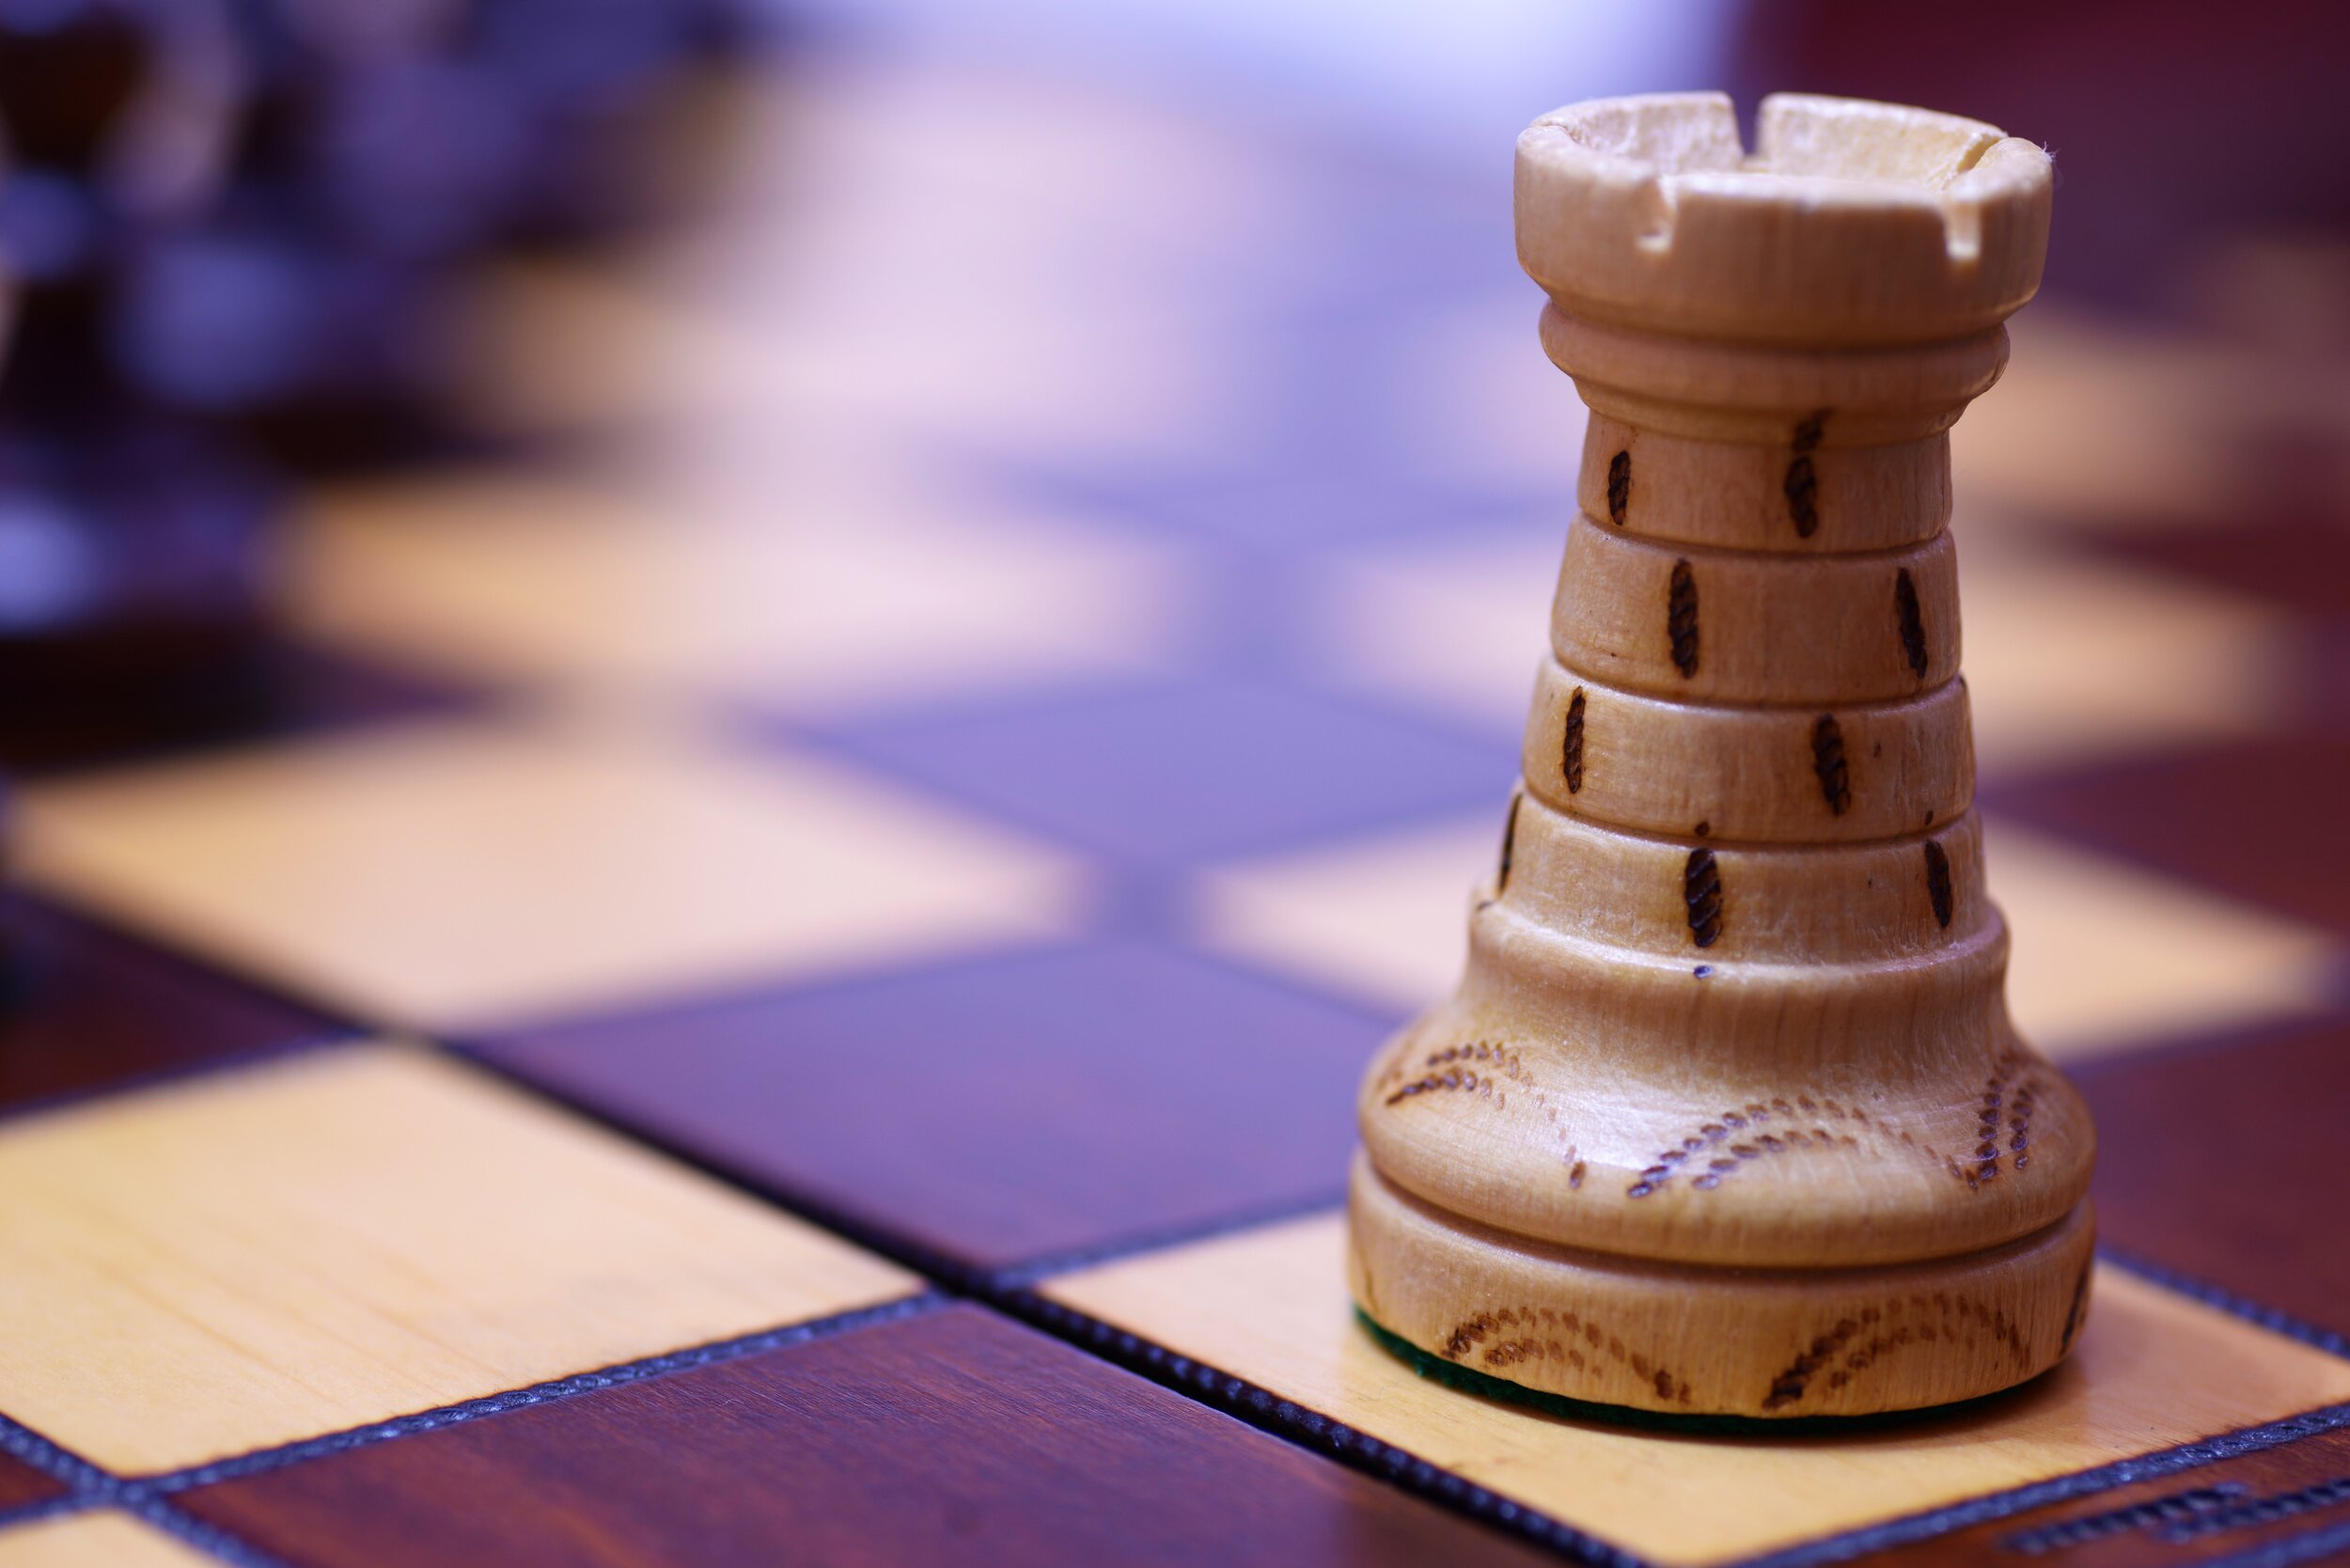 10 tips to play better in Rook Endgame — Chess Enrichment Association